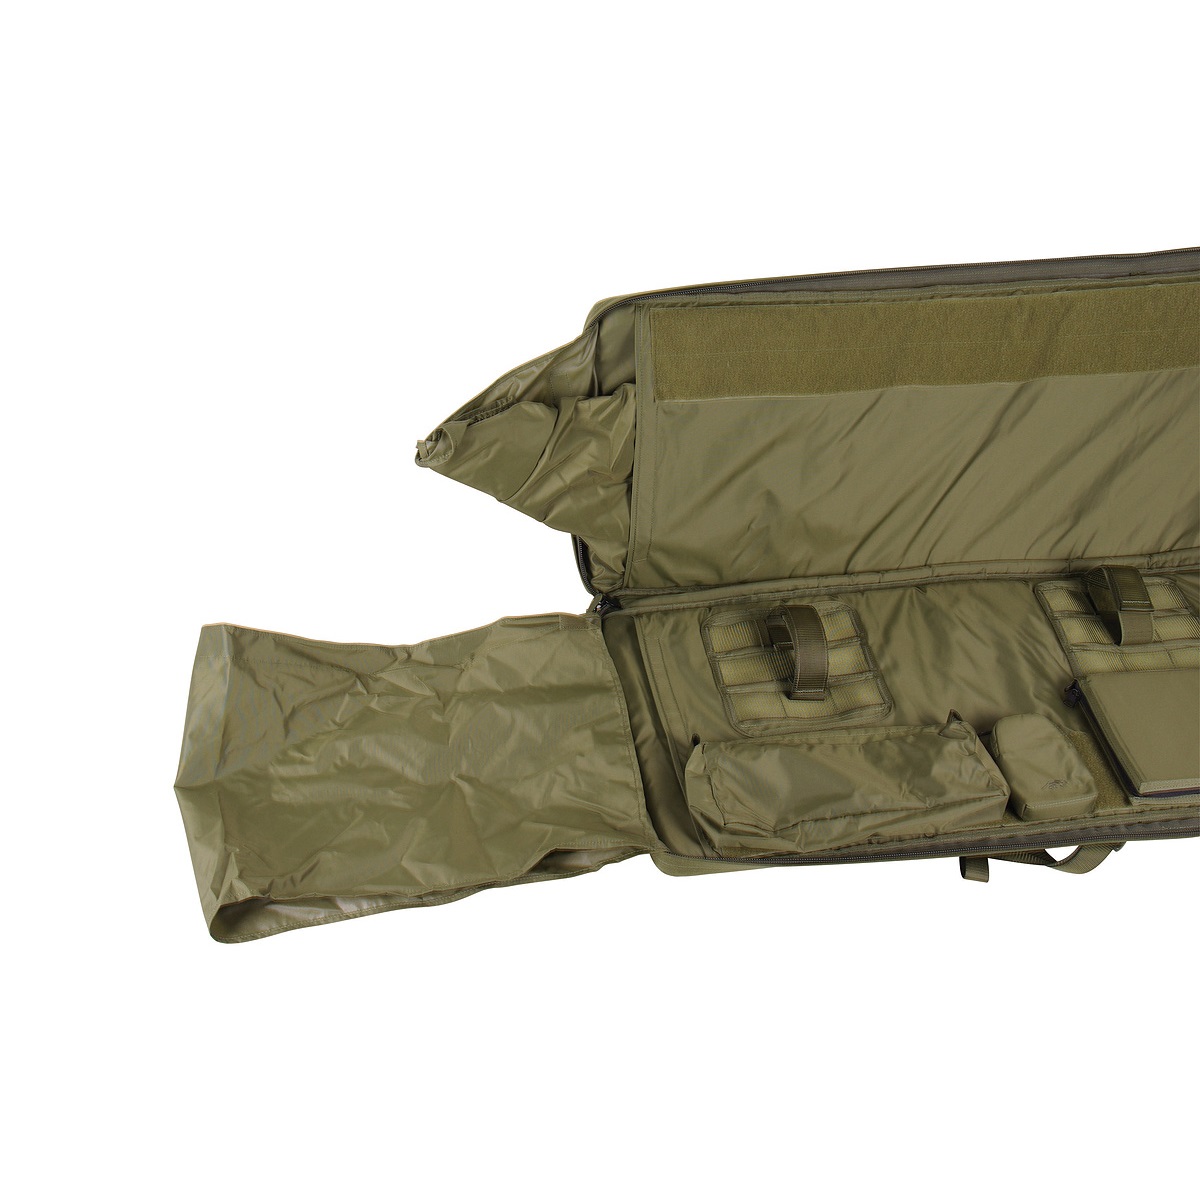 Valken Single Weapon Rifle Carry Case Bag 42" Tan Airsoft Air Hunting 58022 